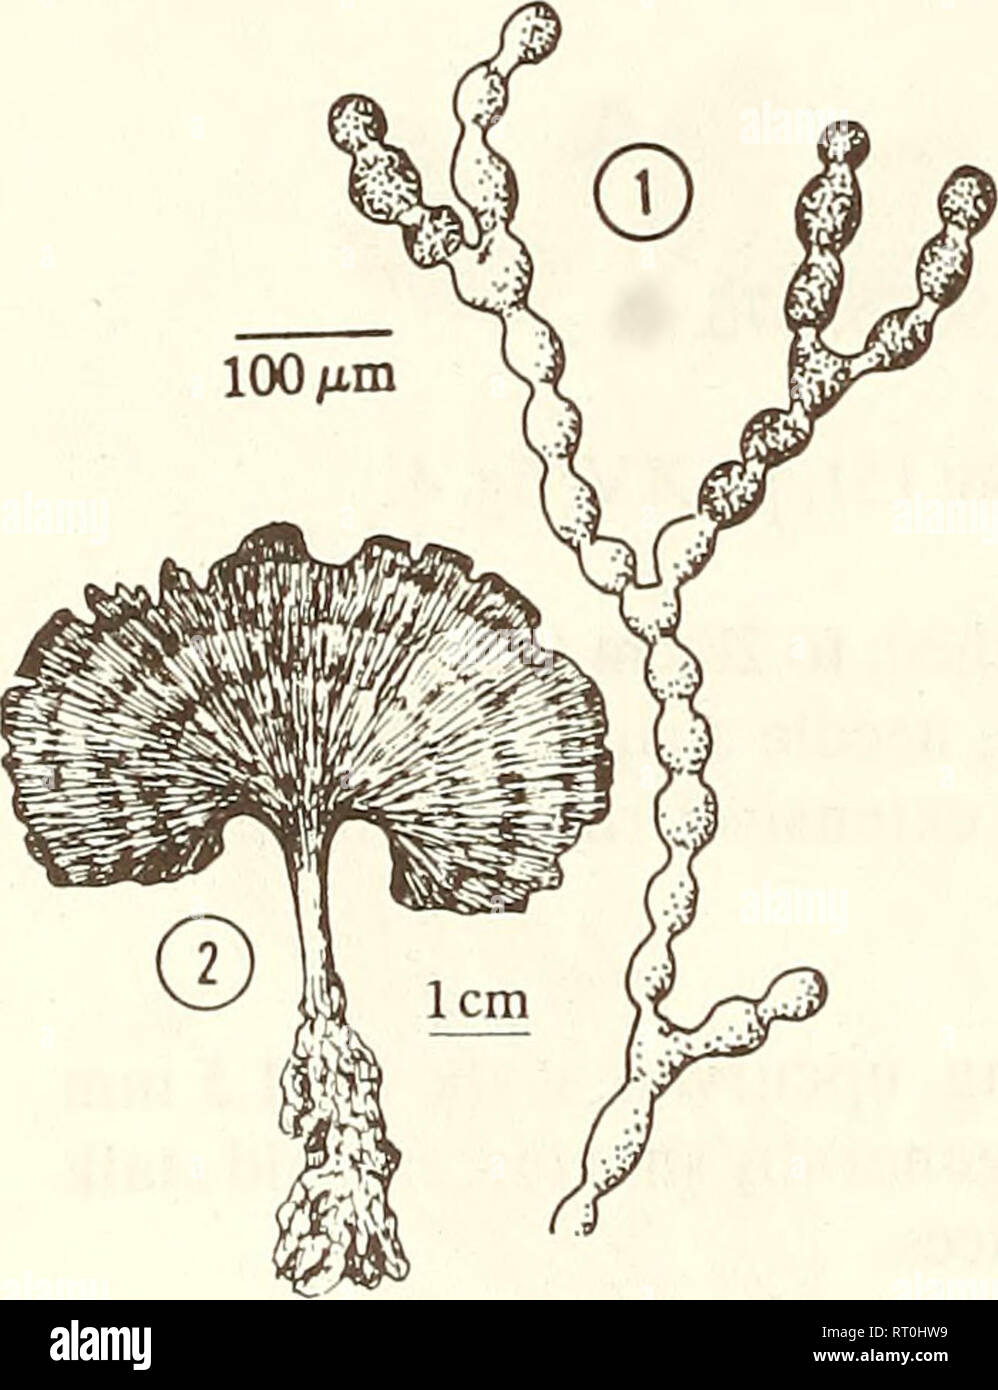 . Atoll research bulletin. Coral reefs and islands; Marine biology; Marine sciences. 1. Habit of plant. 2. Dichotomous branching of branchlet. 3. Forked branchlet apices. Caulerpa verticillata J. Agardh 1847:6. Thallus fine, fibrous, felt-like mats, rarely as individual strands; of indeterminate area, to 7 cm tall; dark green; fronds delicately whorled, 5-8 mm diam.; rhizomes creeping, stoloniferous, slender; rhizoids few, branched. Branchlets 5-7 times dichotomous, 100-210 /xm diam. at base, 30-40 yum at apex, lower segments 10 or more diameters long; apices abruptly forked, pointed; stalk 14 Stock Photo